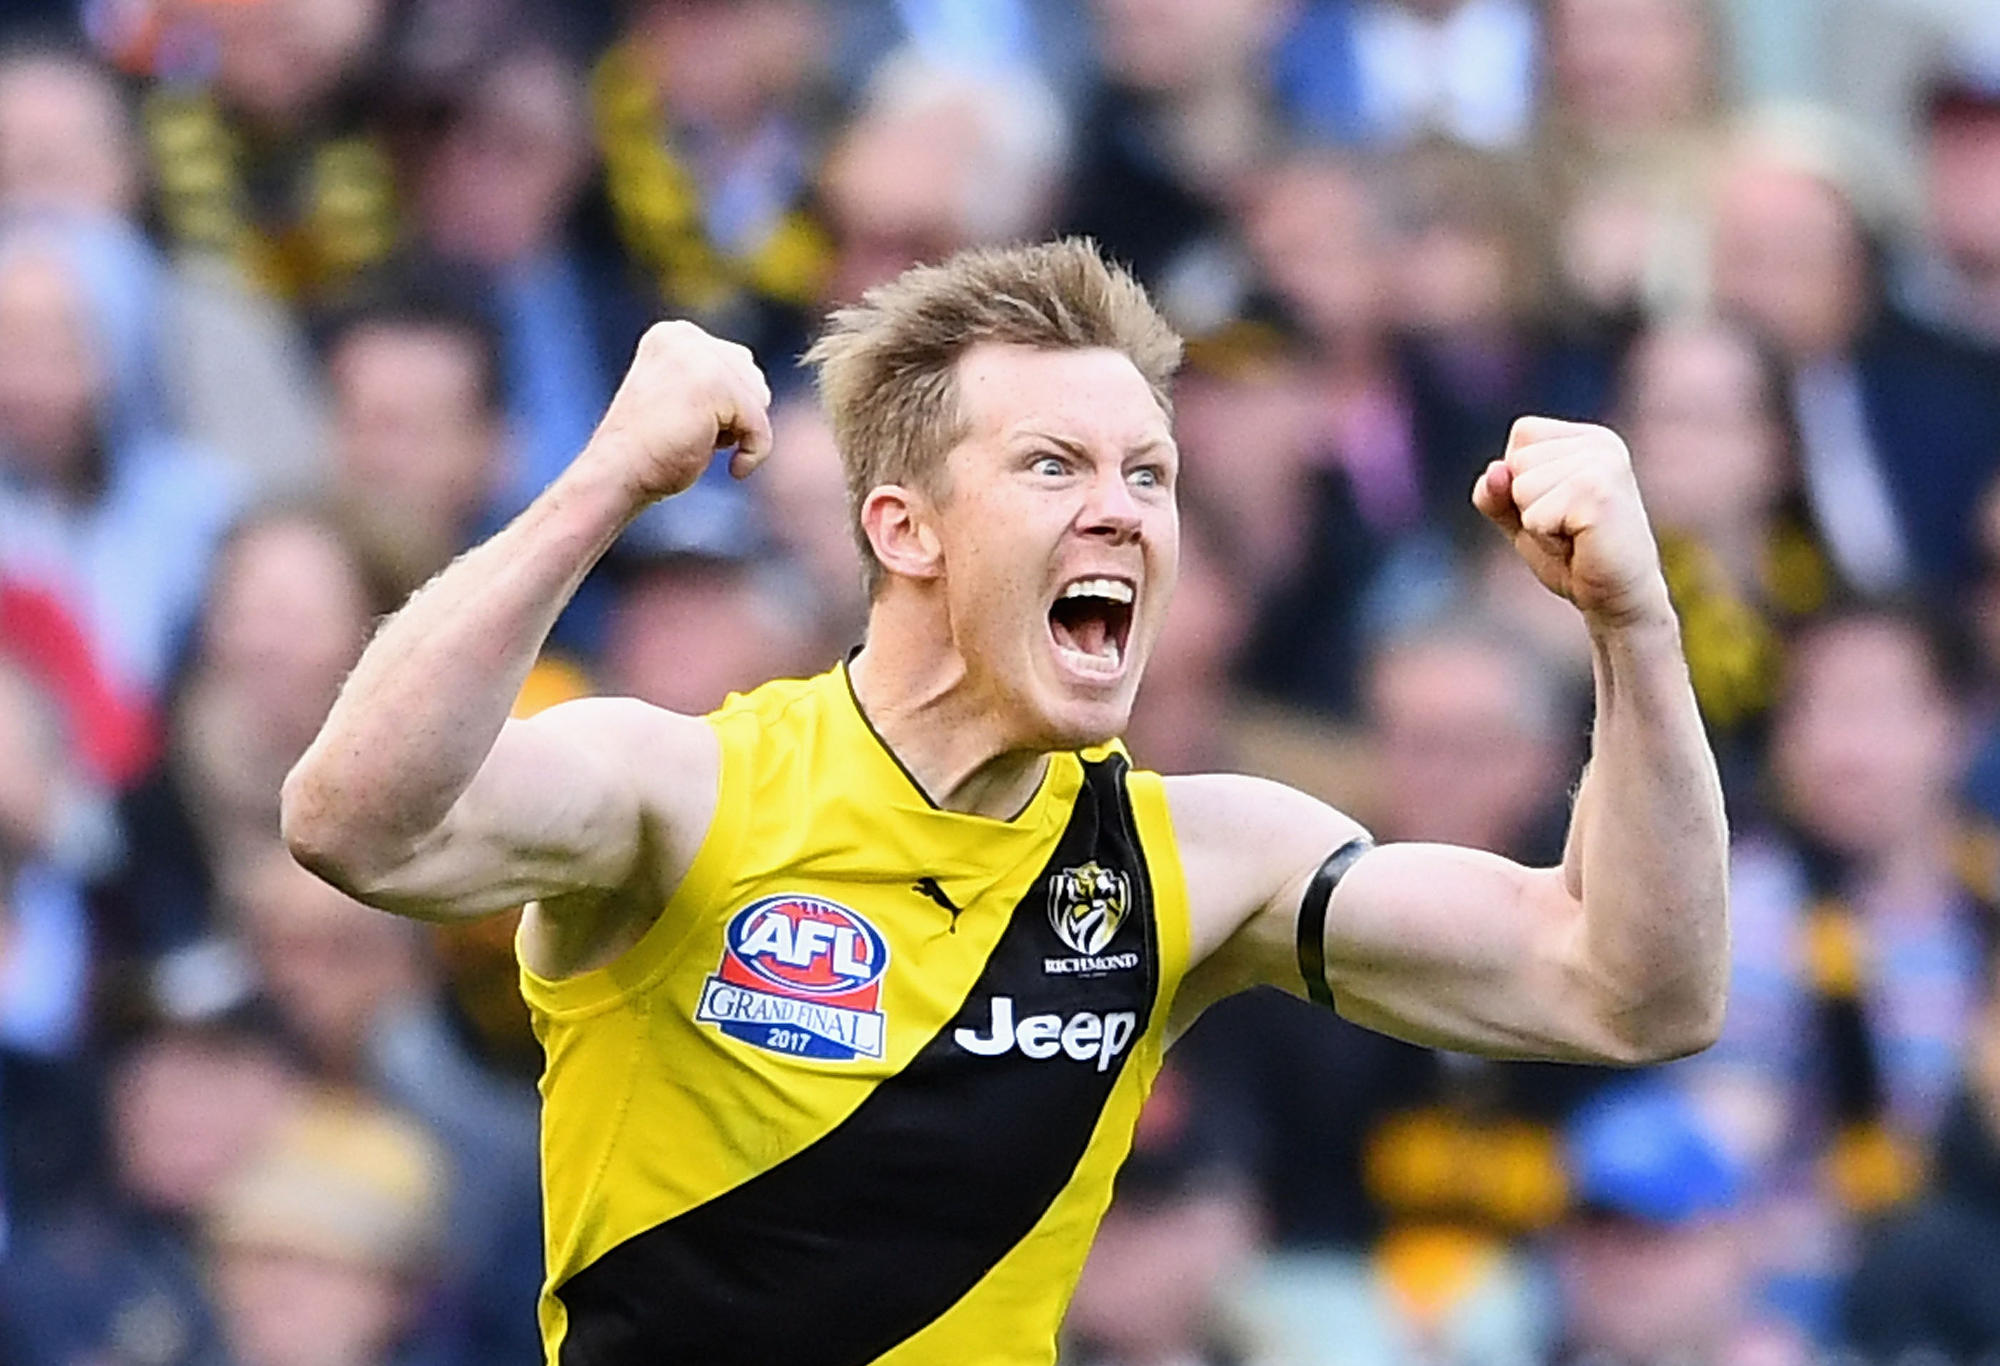 Jack Riewoldt of the Tigers celebrates kicking a goal during the 2017 AFL Grand Final match between the Adelaide Crows and the Richmond Tigers at Melbourne Cricket Ground on September 30, 2017 in Melbourne, Australia.